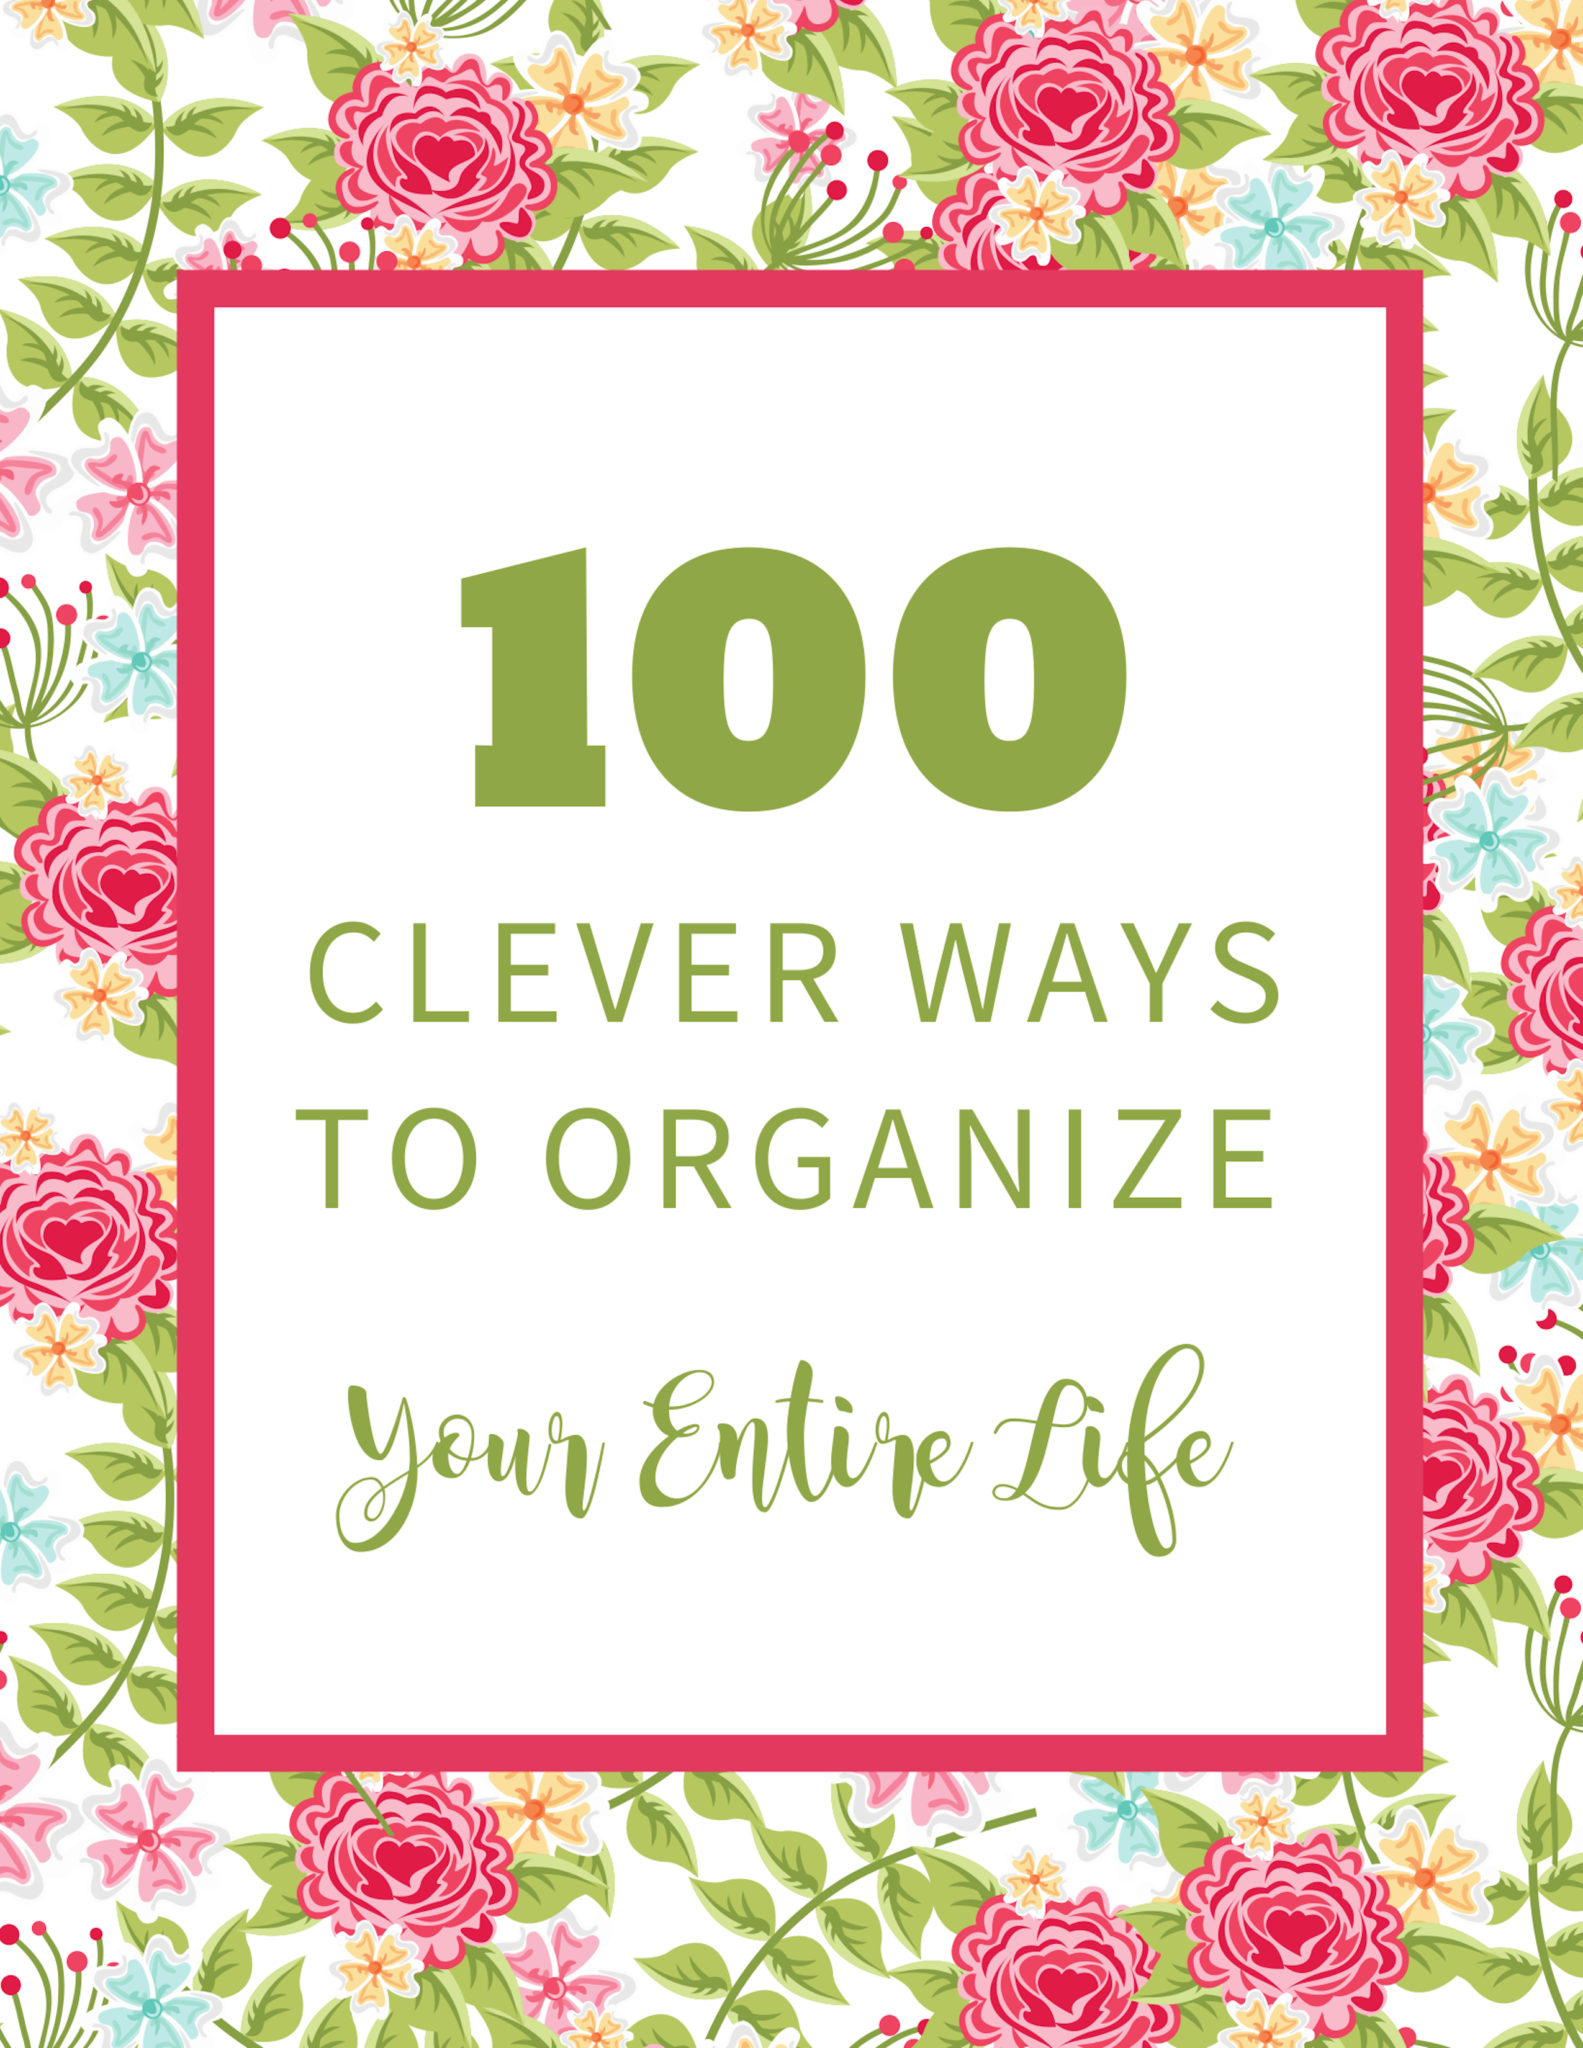 Organize your life: 100 clever ways to get started with an organization plan today! #organization #organize